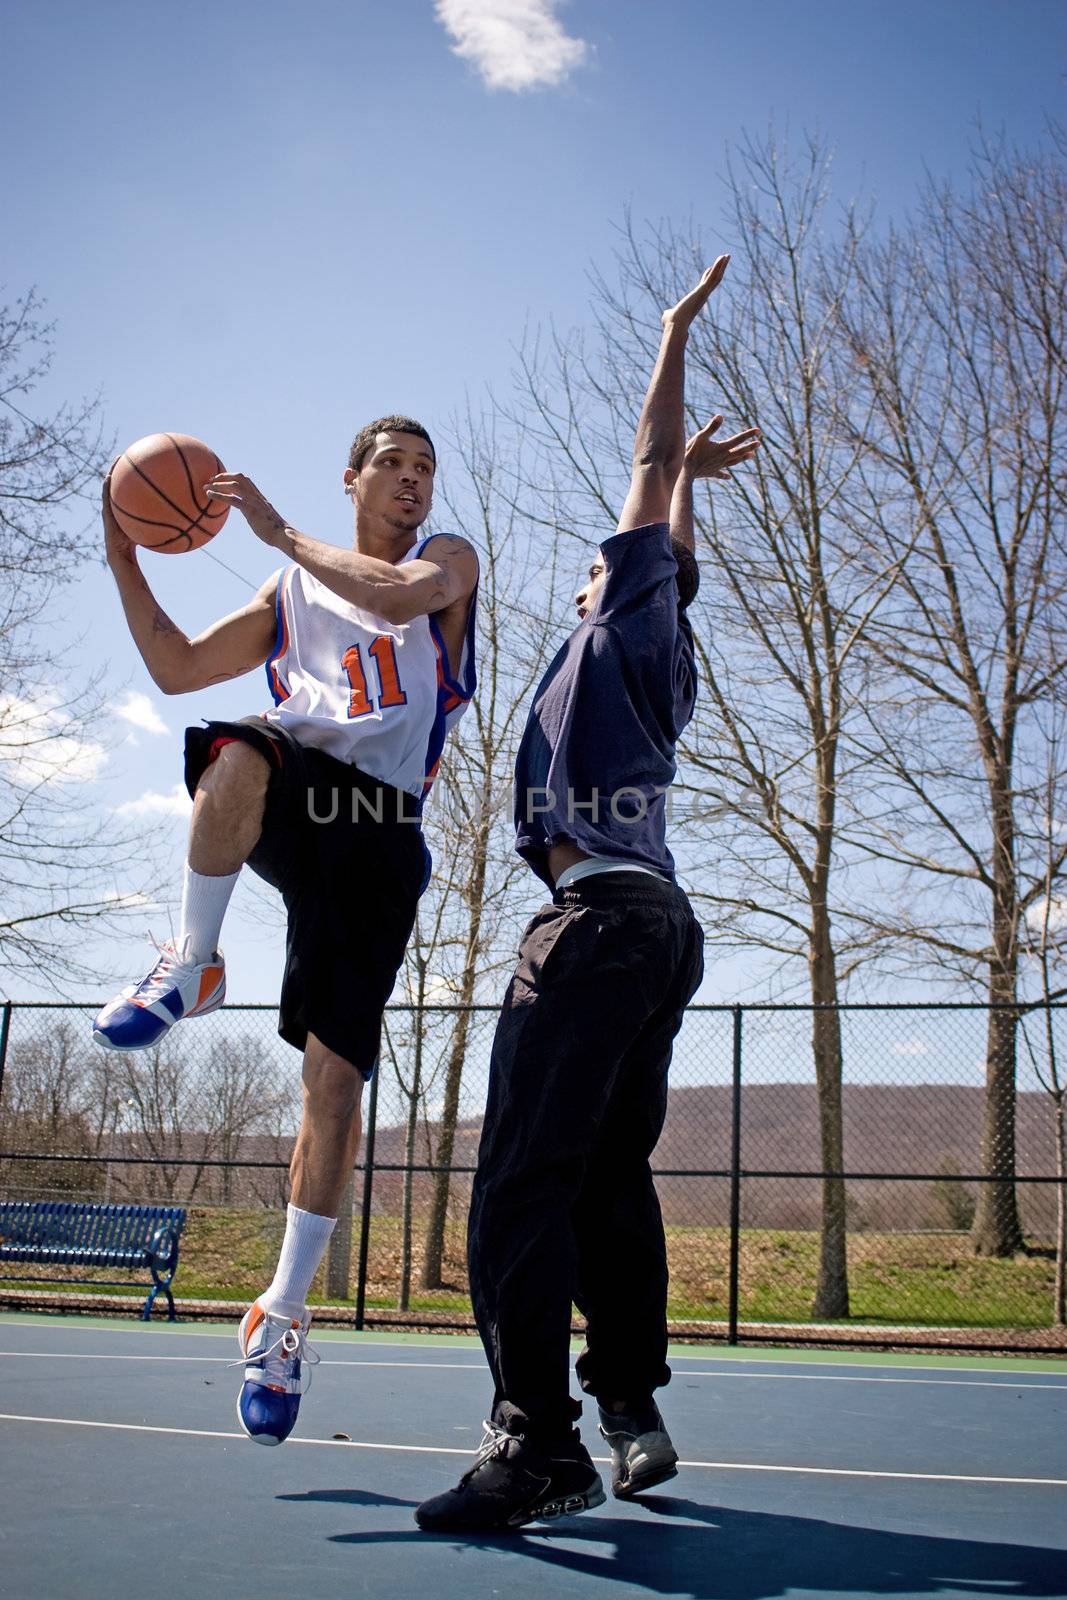 Two young basketball players compete fiercely against each other.